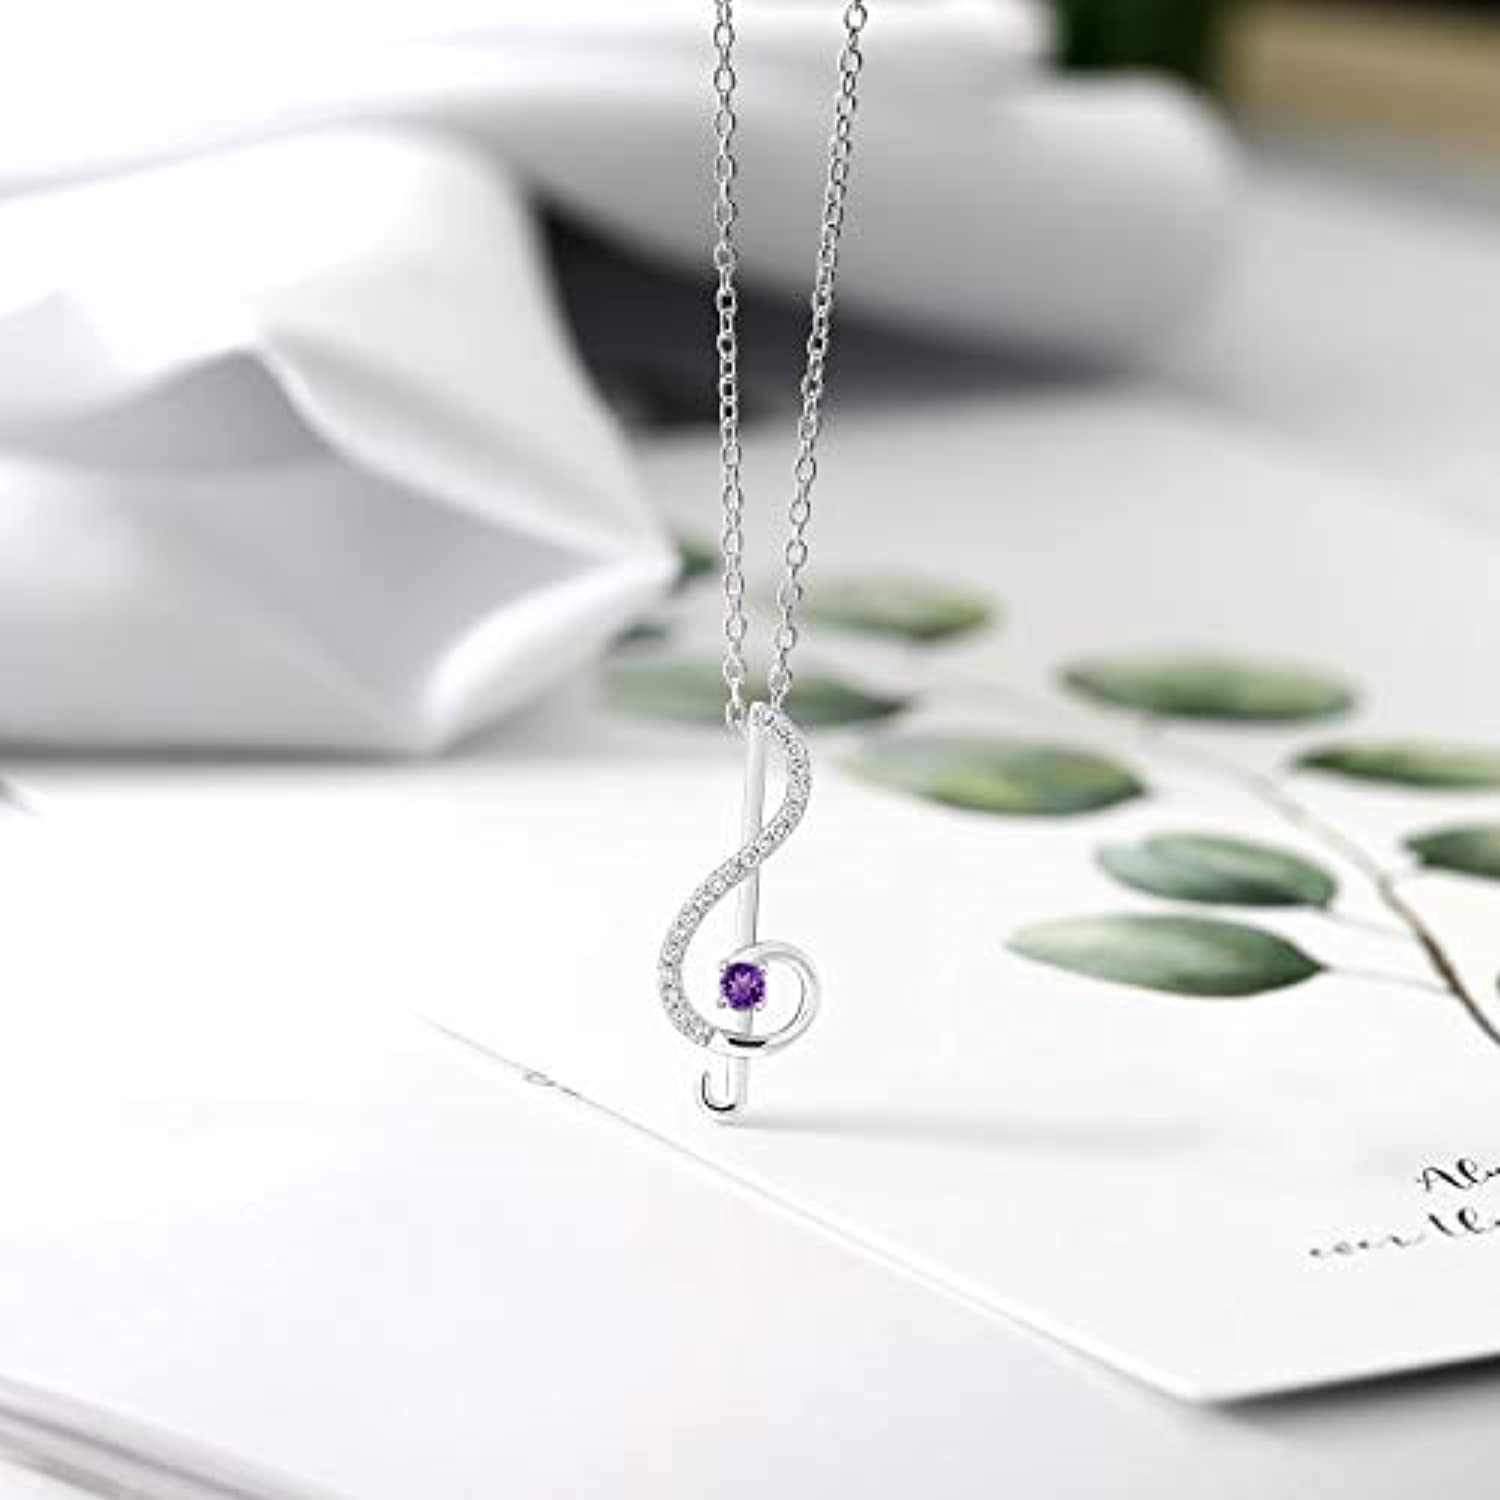 Keren Hanan Inspired by Music 925 Sterling Silver Treble Clef Pendant Necklace For Women Set with Purple Amethyst and White Zirconia  with 18 Inch Silver Chain